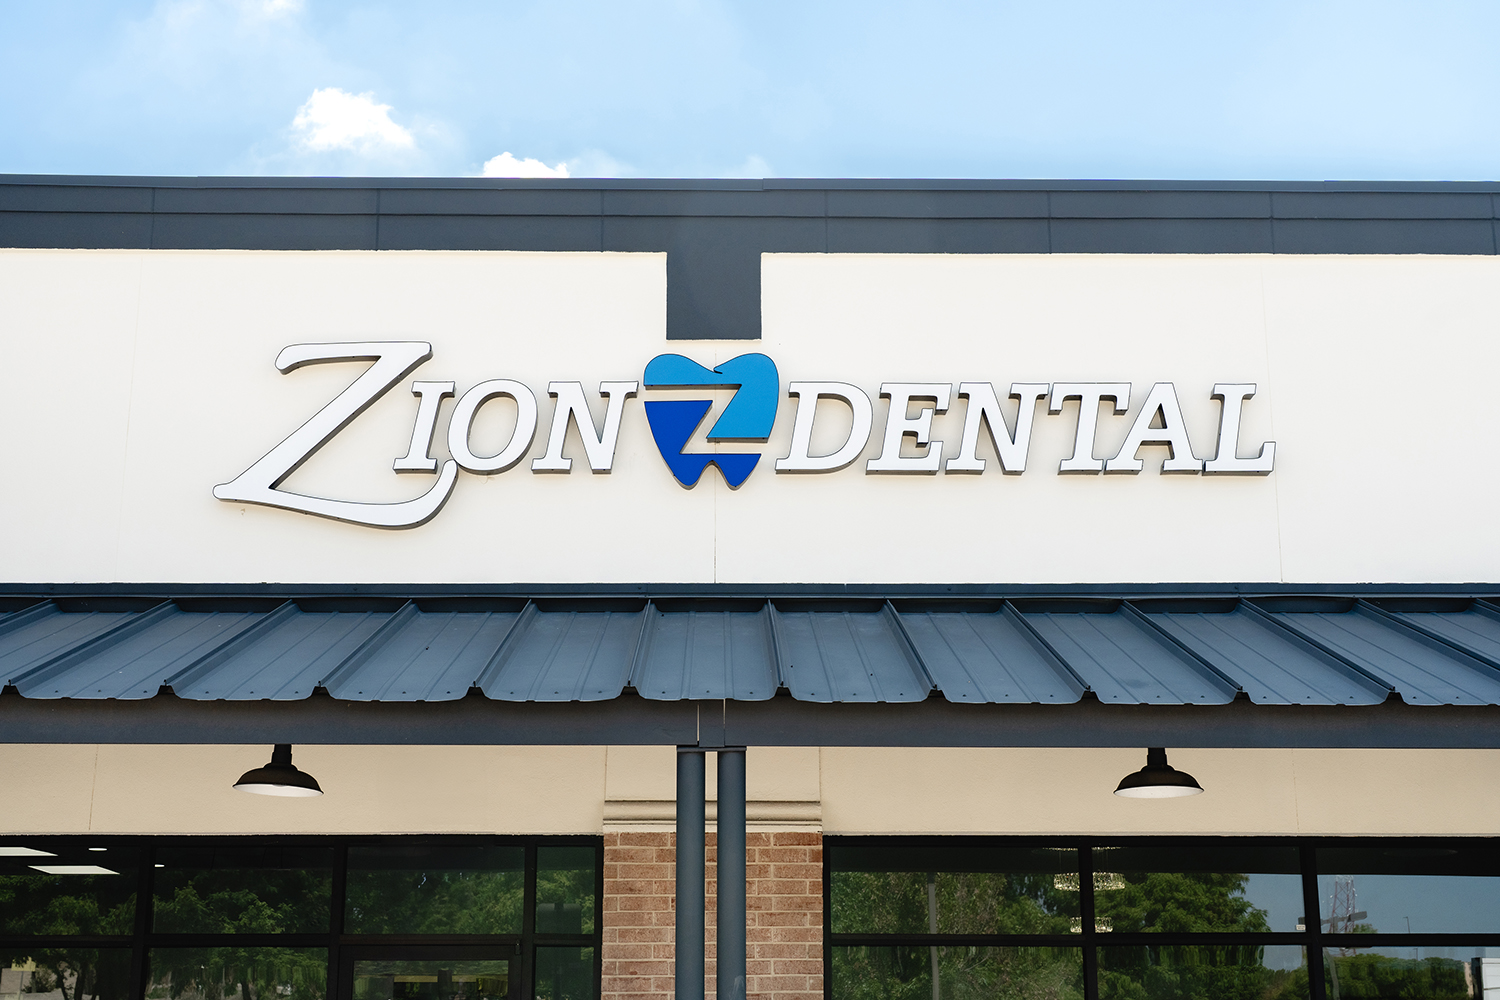 outside view of zion dental office